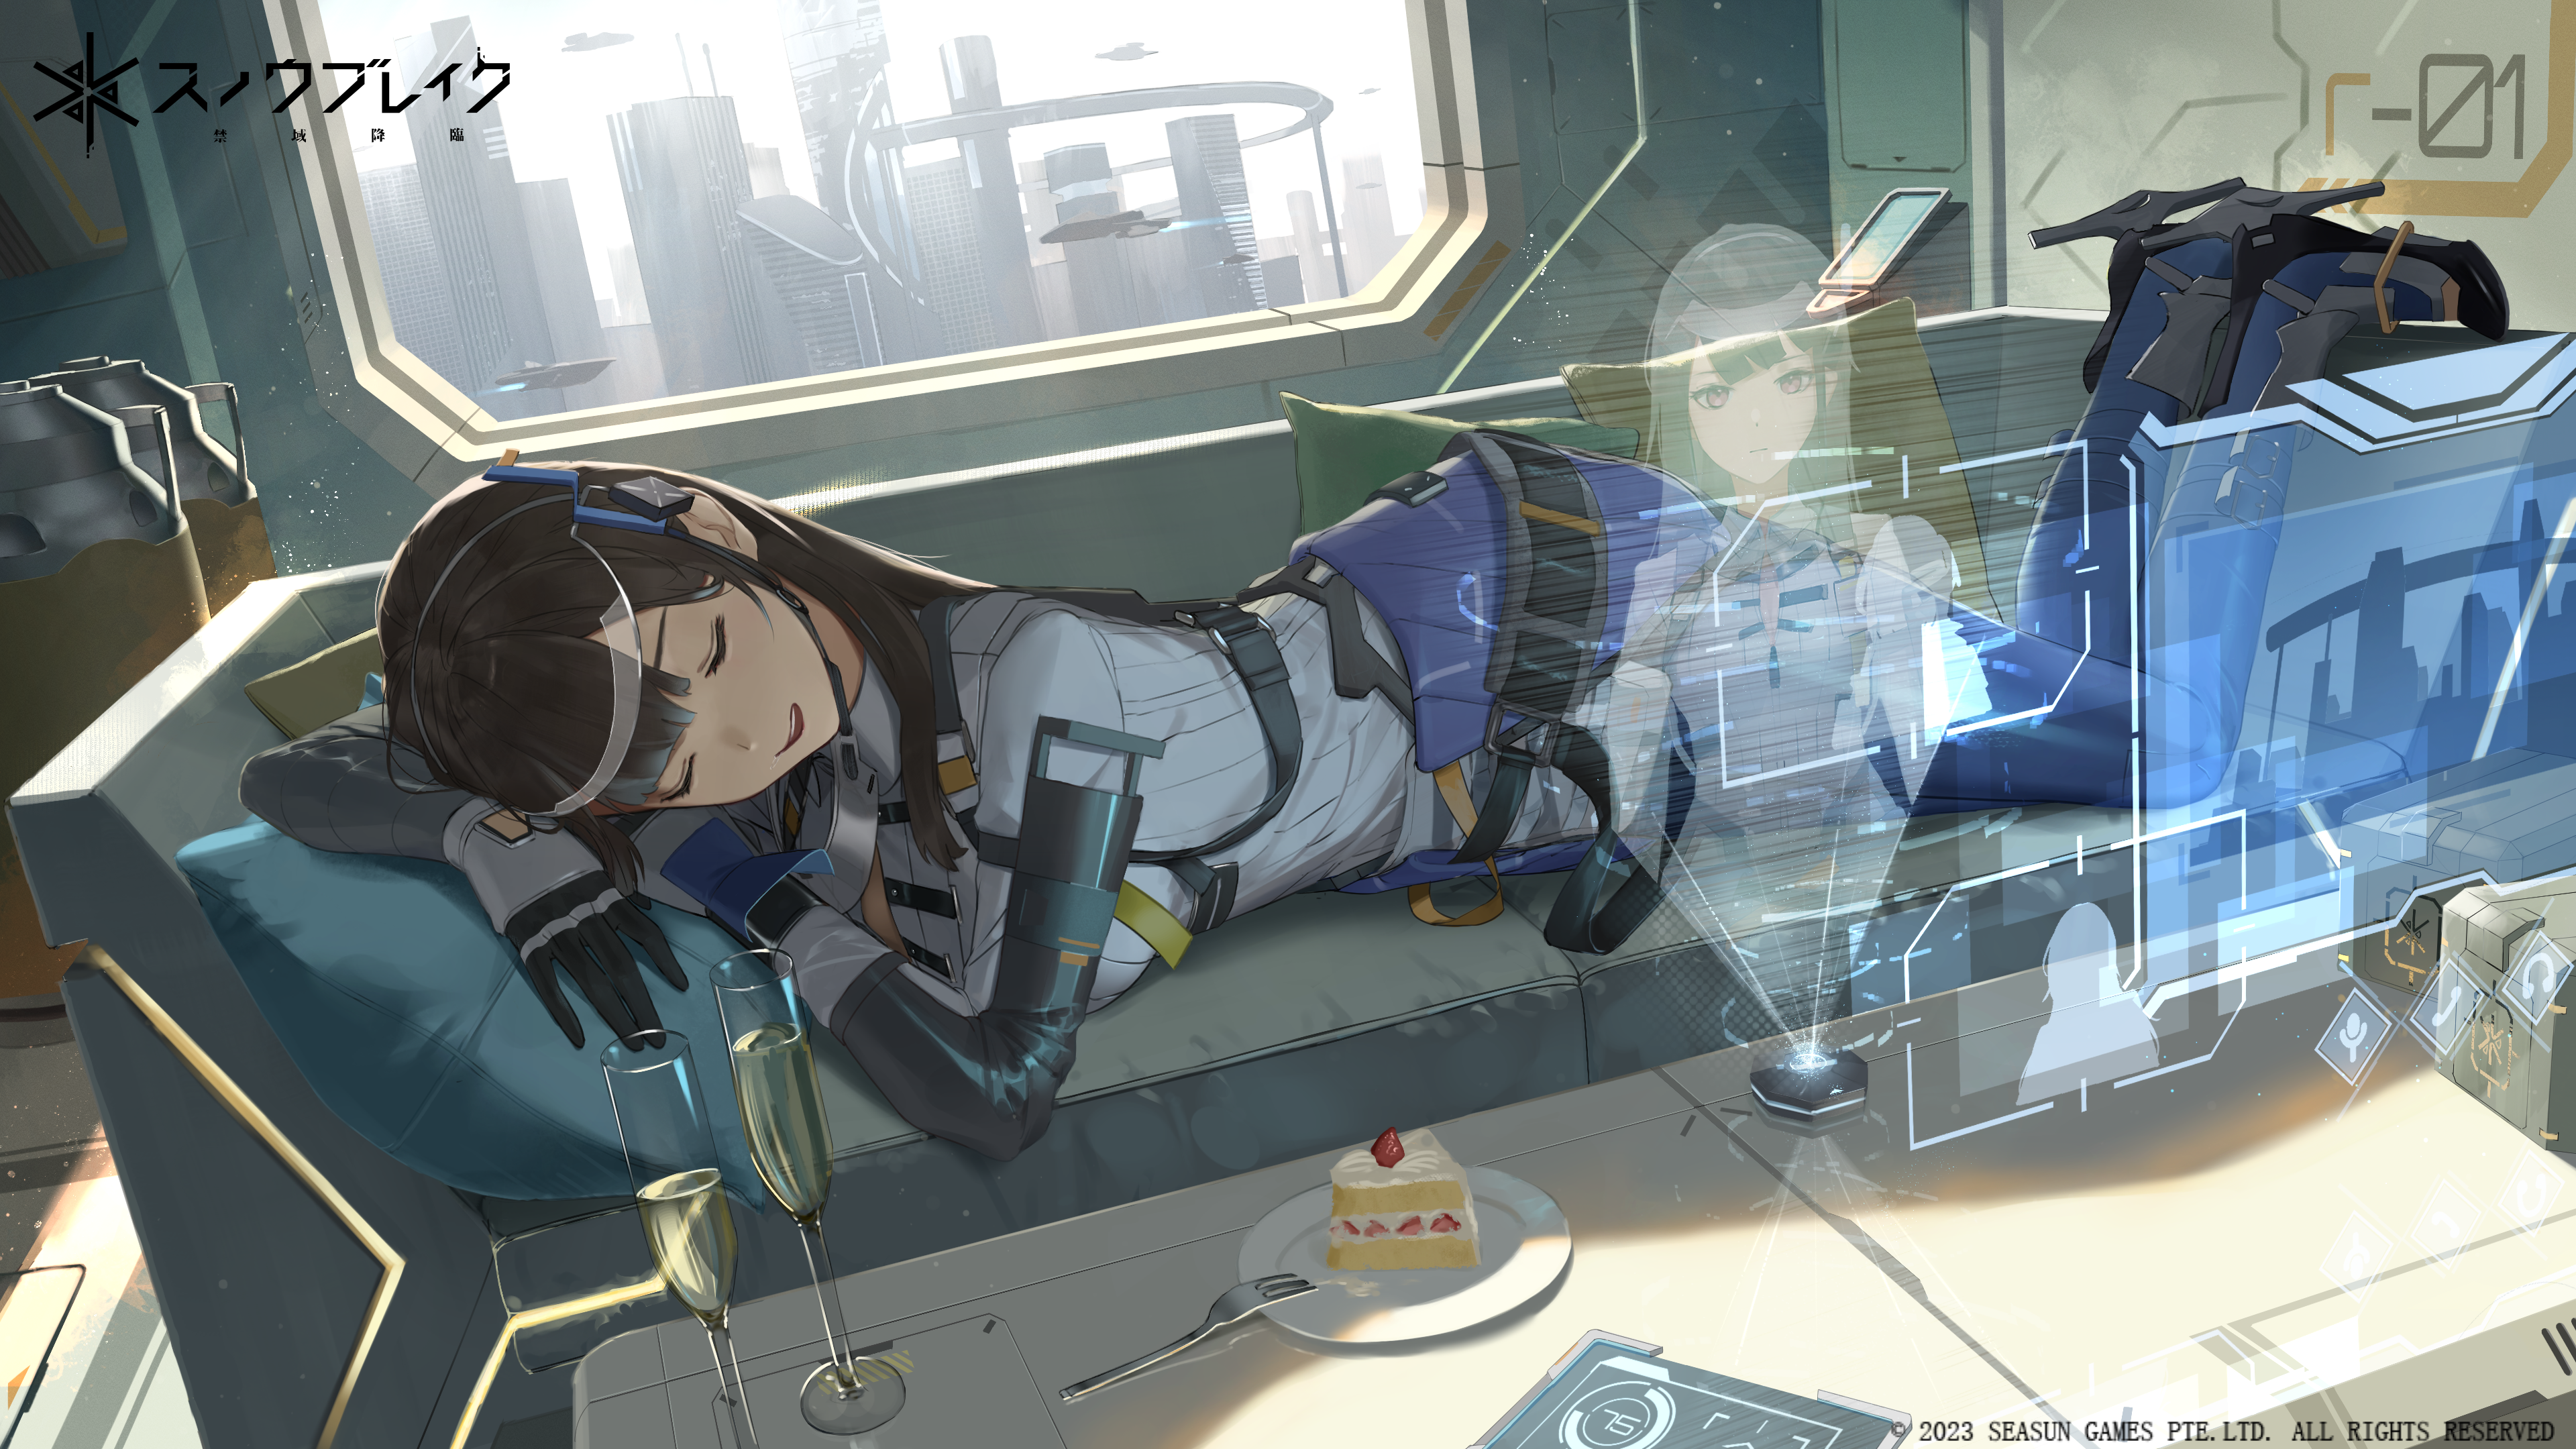 Anime 3840x2160 sleeping closed eyes lying down lying on side long hair cake fork plates watermarked indoors women indoors anime girls pillow drink champagne drinking glass window city building couch hologram technology Snowbreak: Containment Zone Yao (Snowbreak)